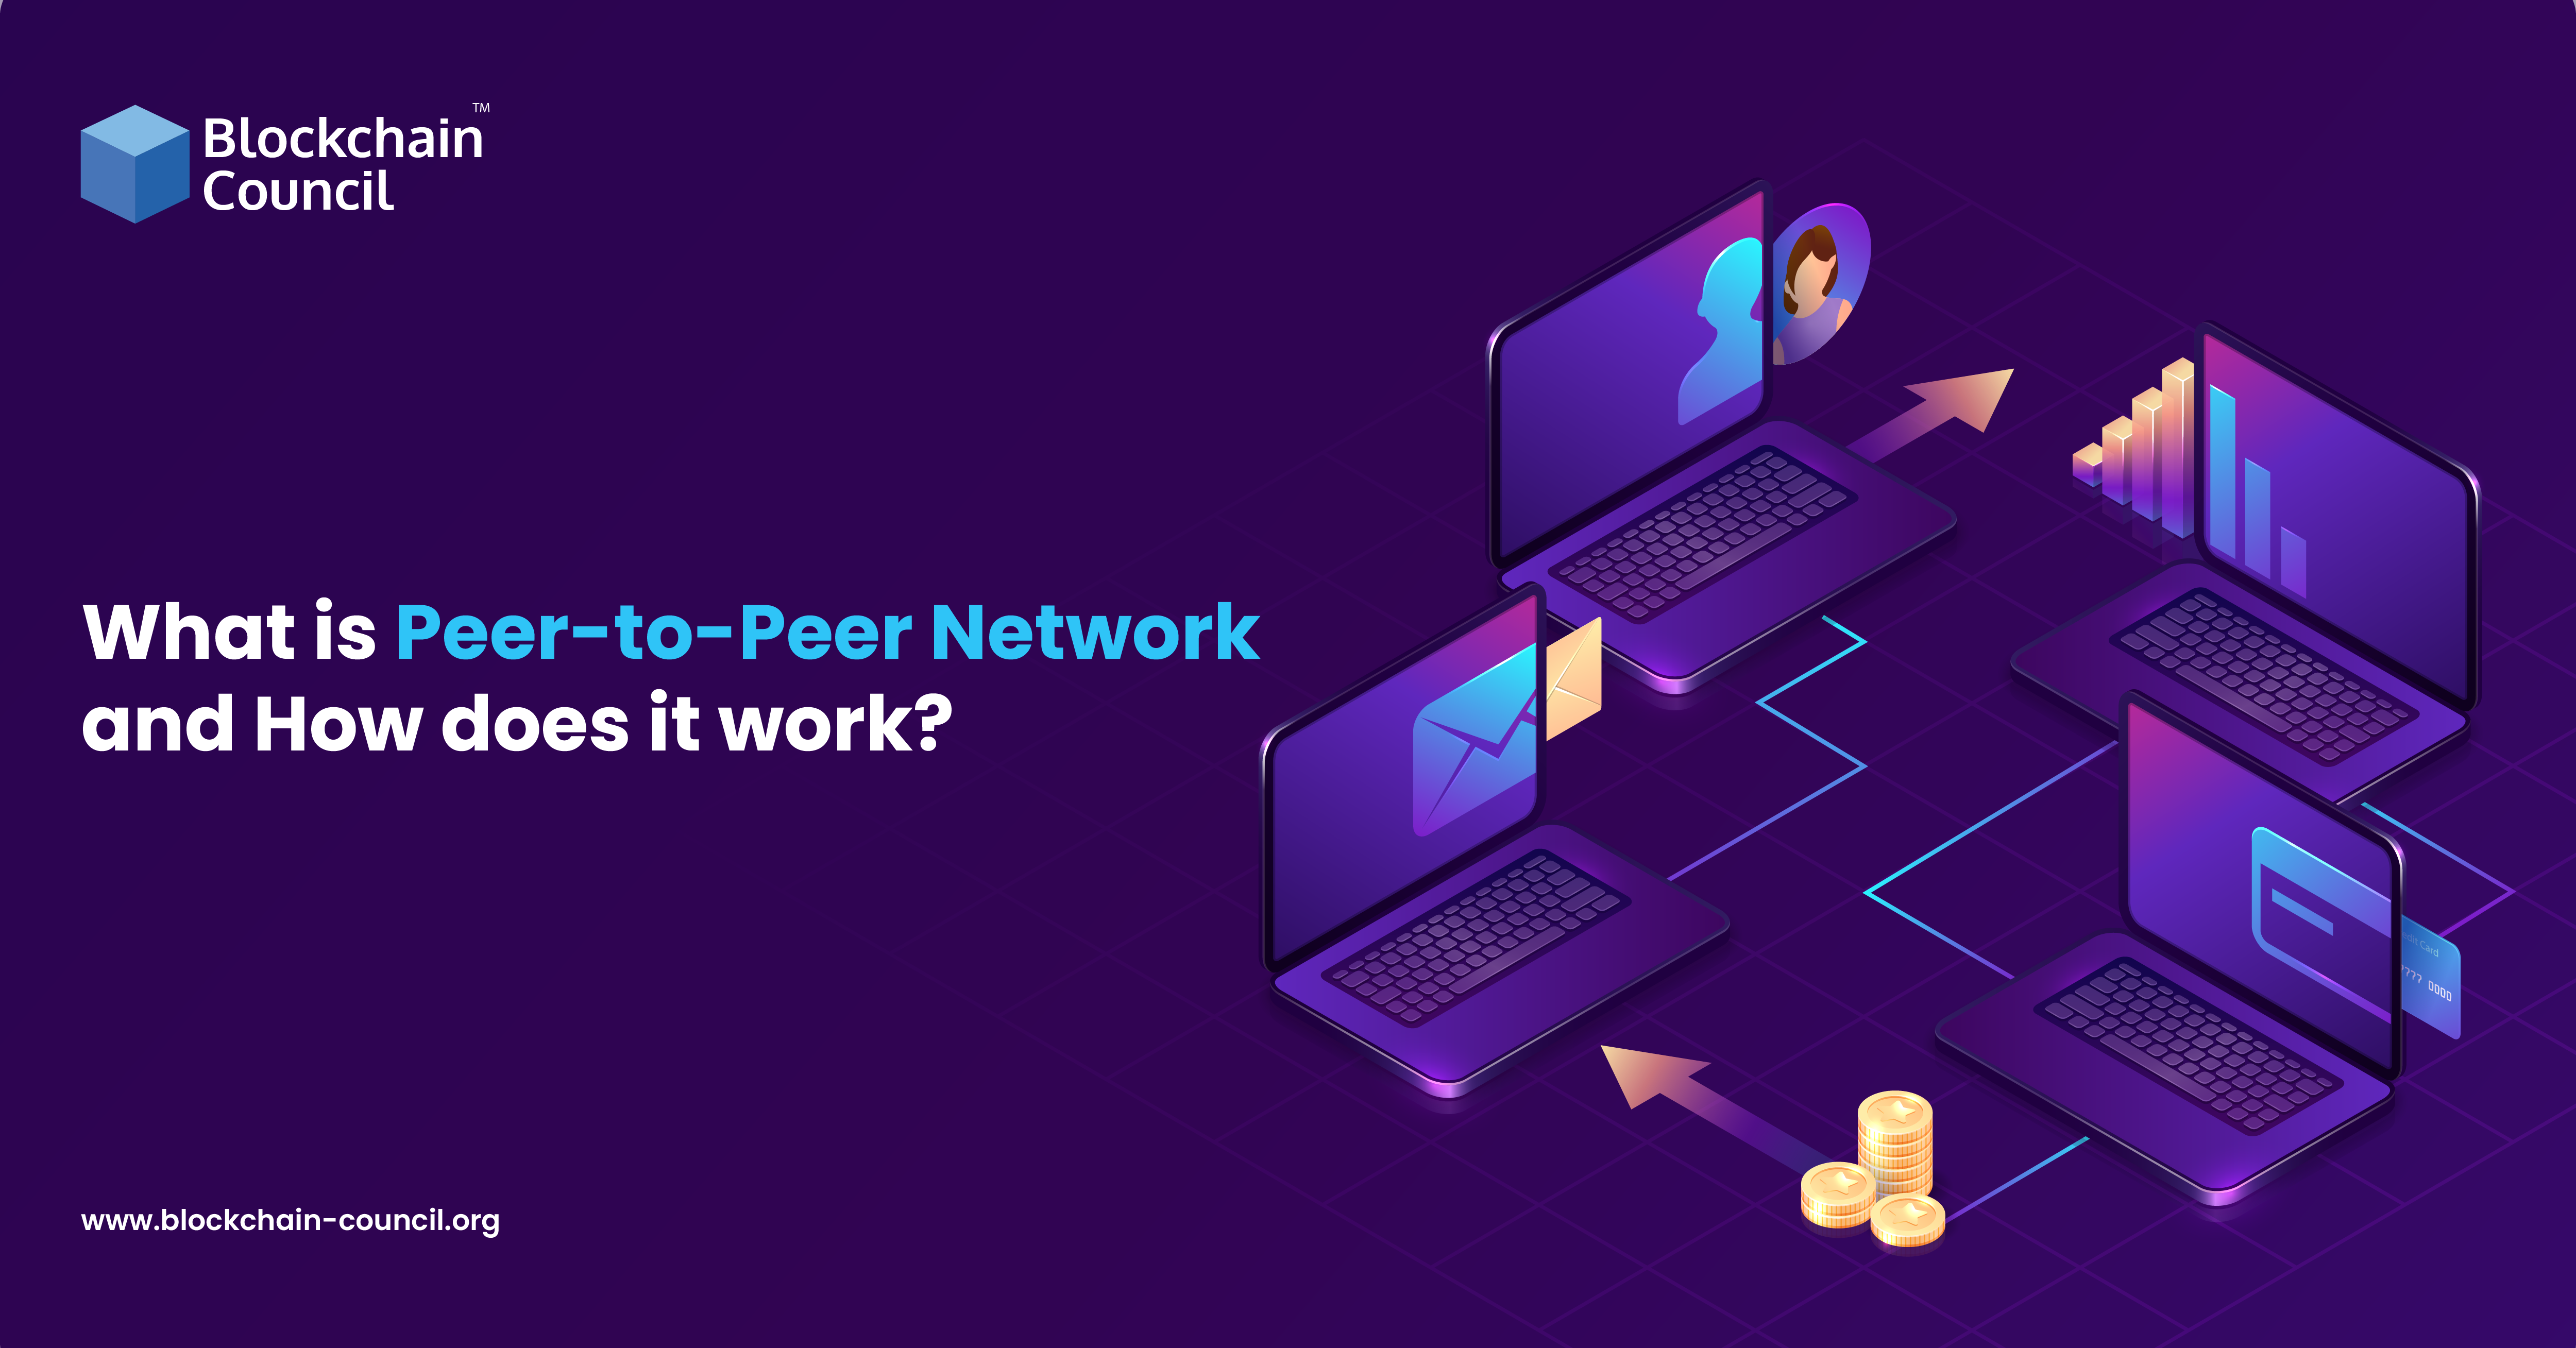 What is Peer to Peer Network, and How Does It Work?